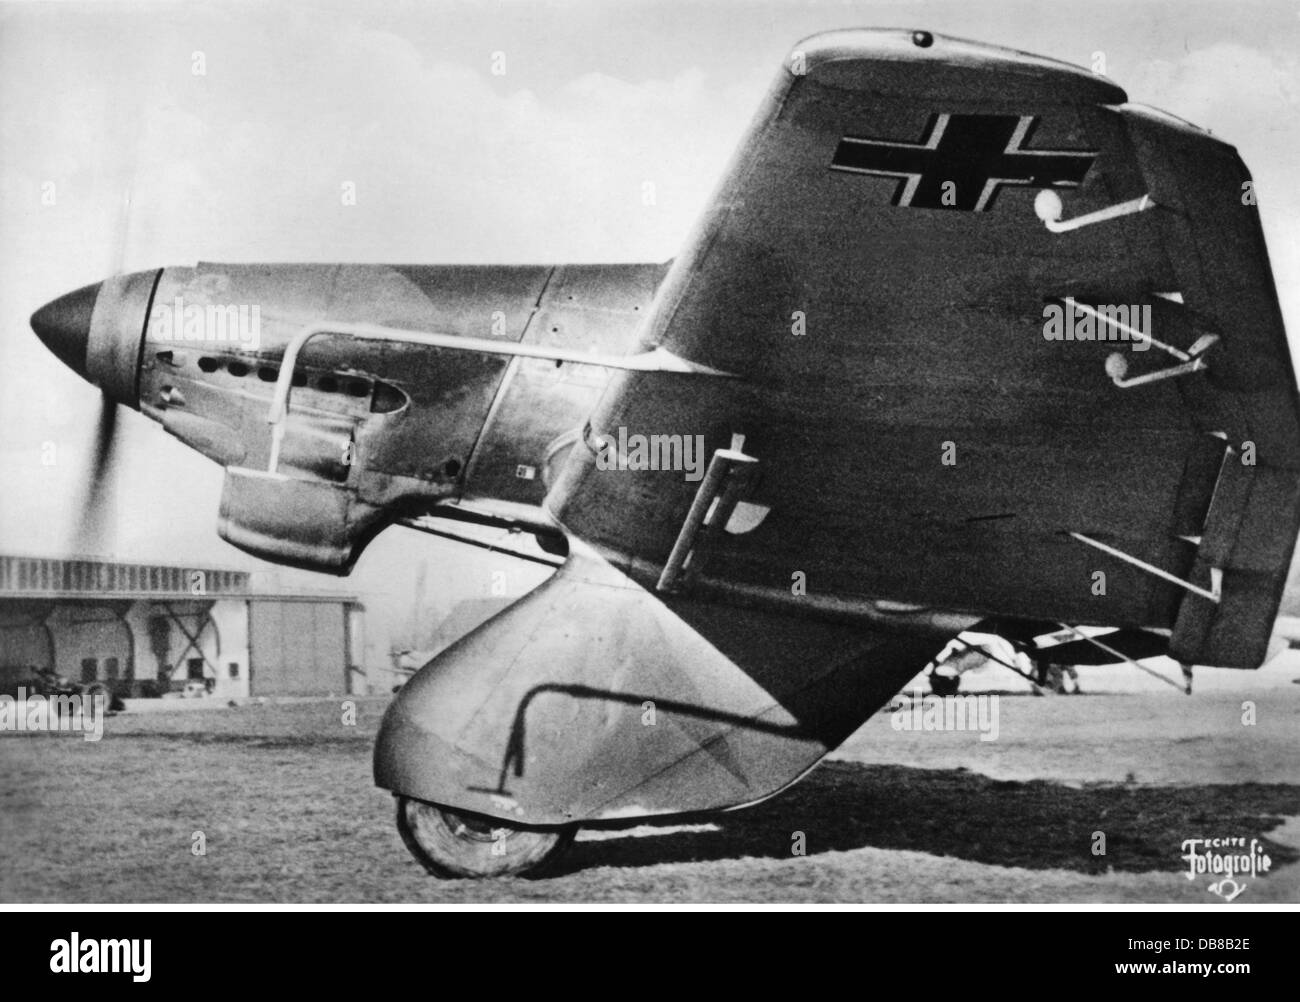 Nazism / National Socialism, military, Luftwaffe (German Air Force), aeroplane, Junkers Ju 87 A 'Stuka', late 1930s, Additional-Rights-Clearences-Not Available Stock Photo